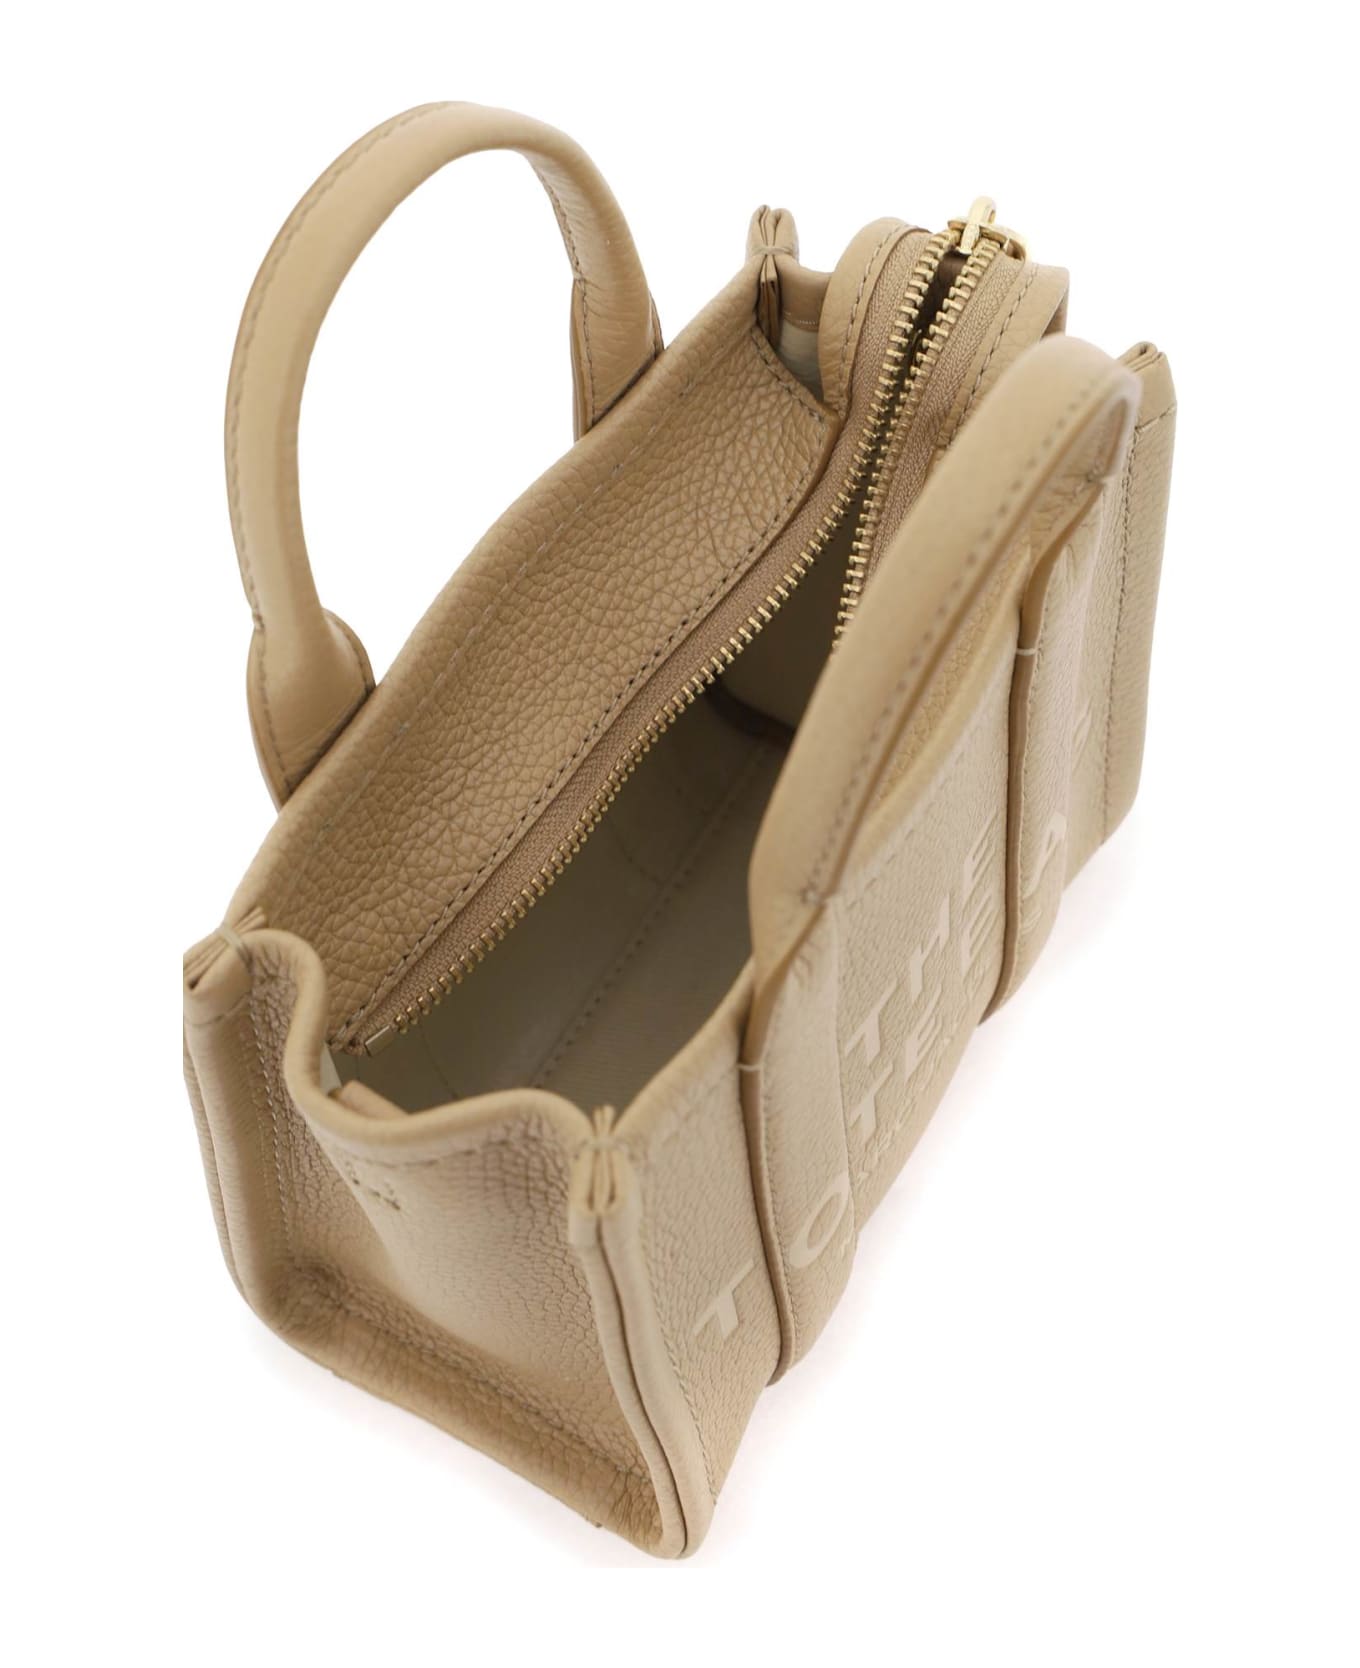 Marc Jacobs The Leather Mini Tote Bag - CAMEL (Beige) トートバッグ